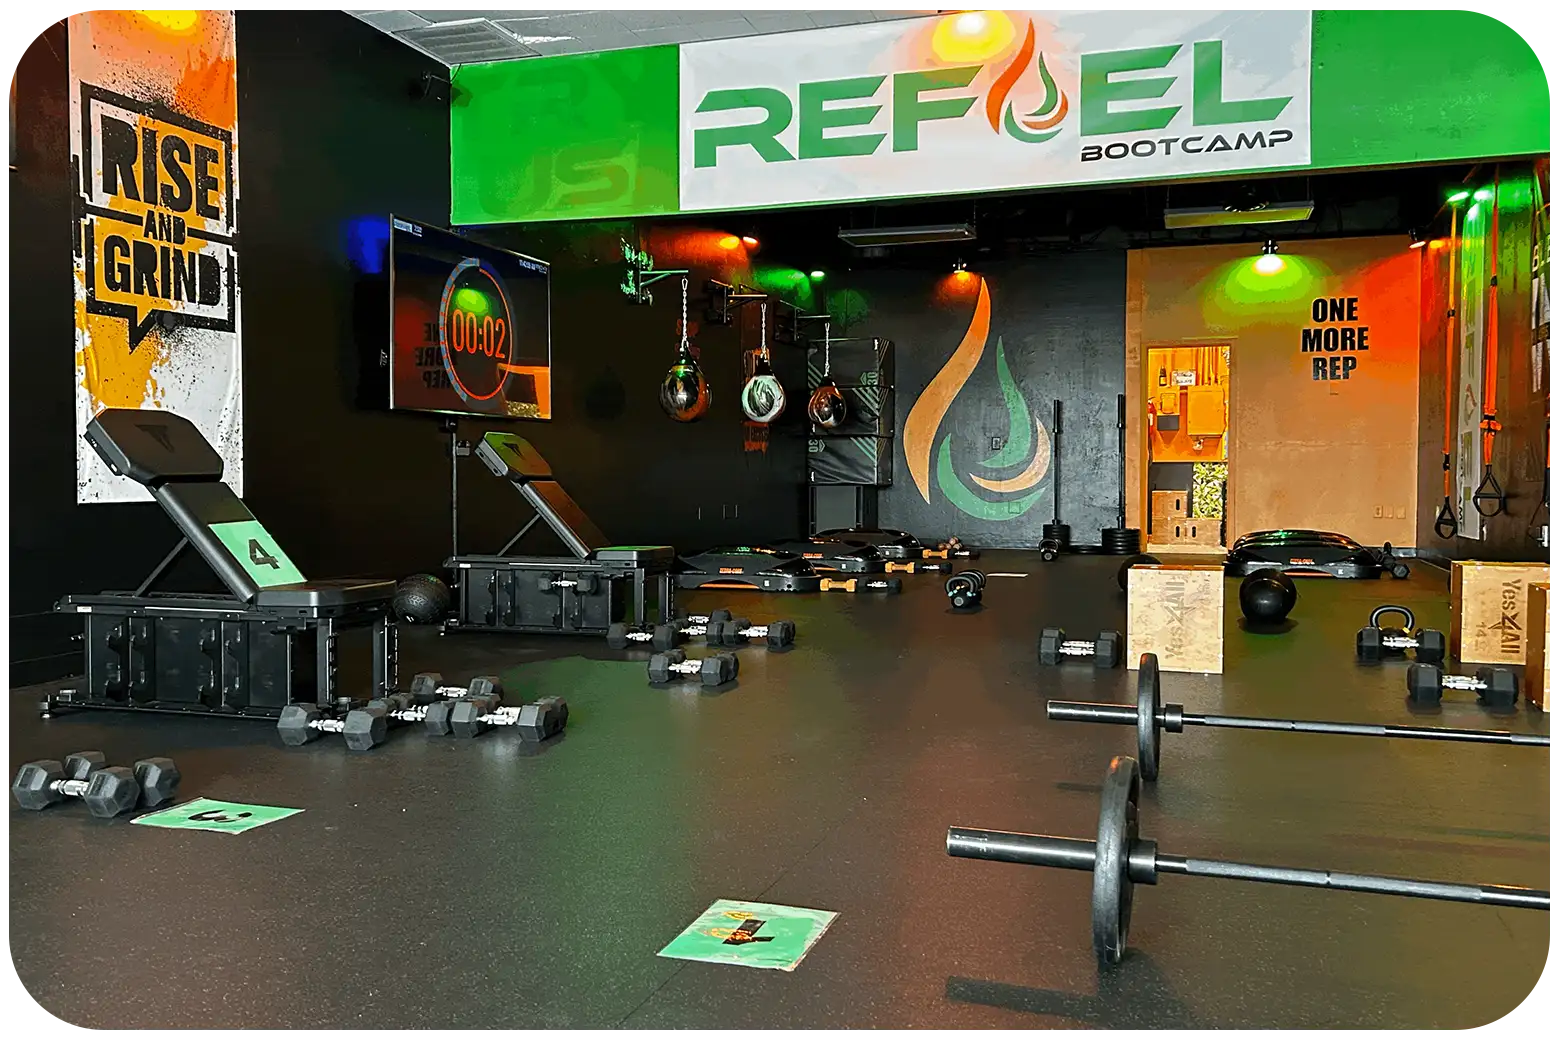 An indoor bootcamp powered by Myzone at Refuel.